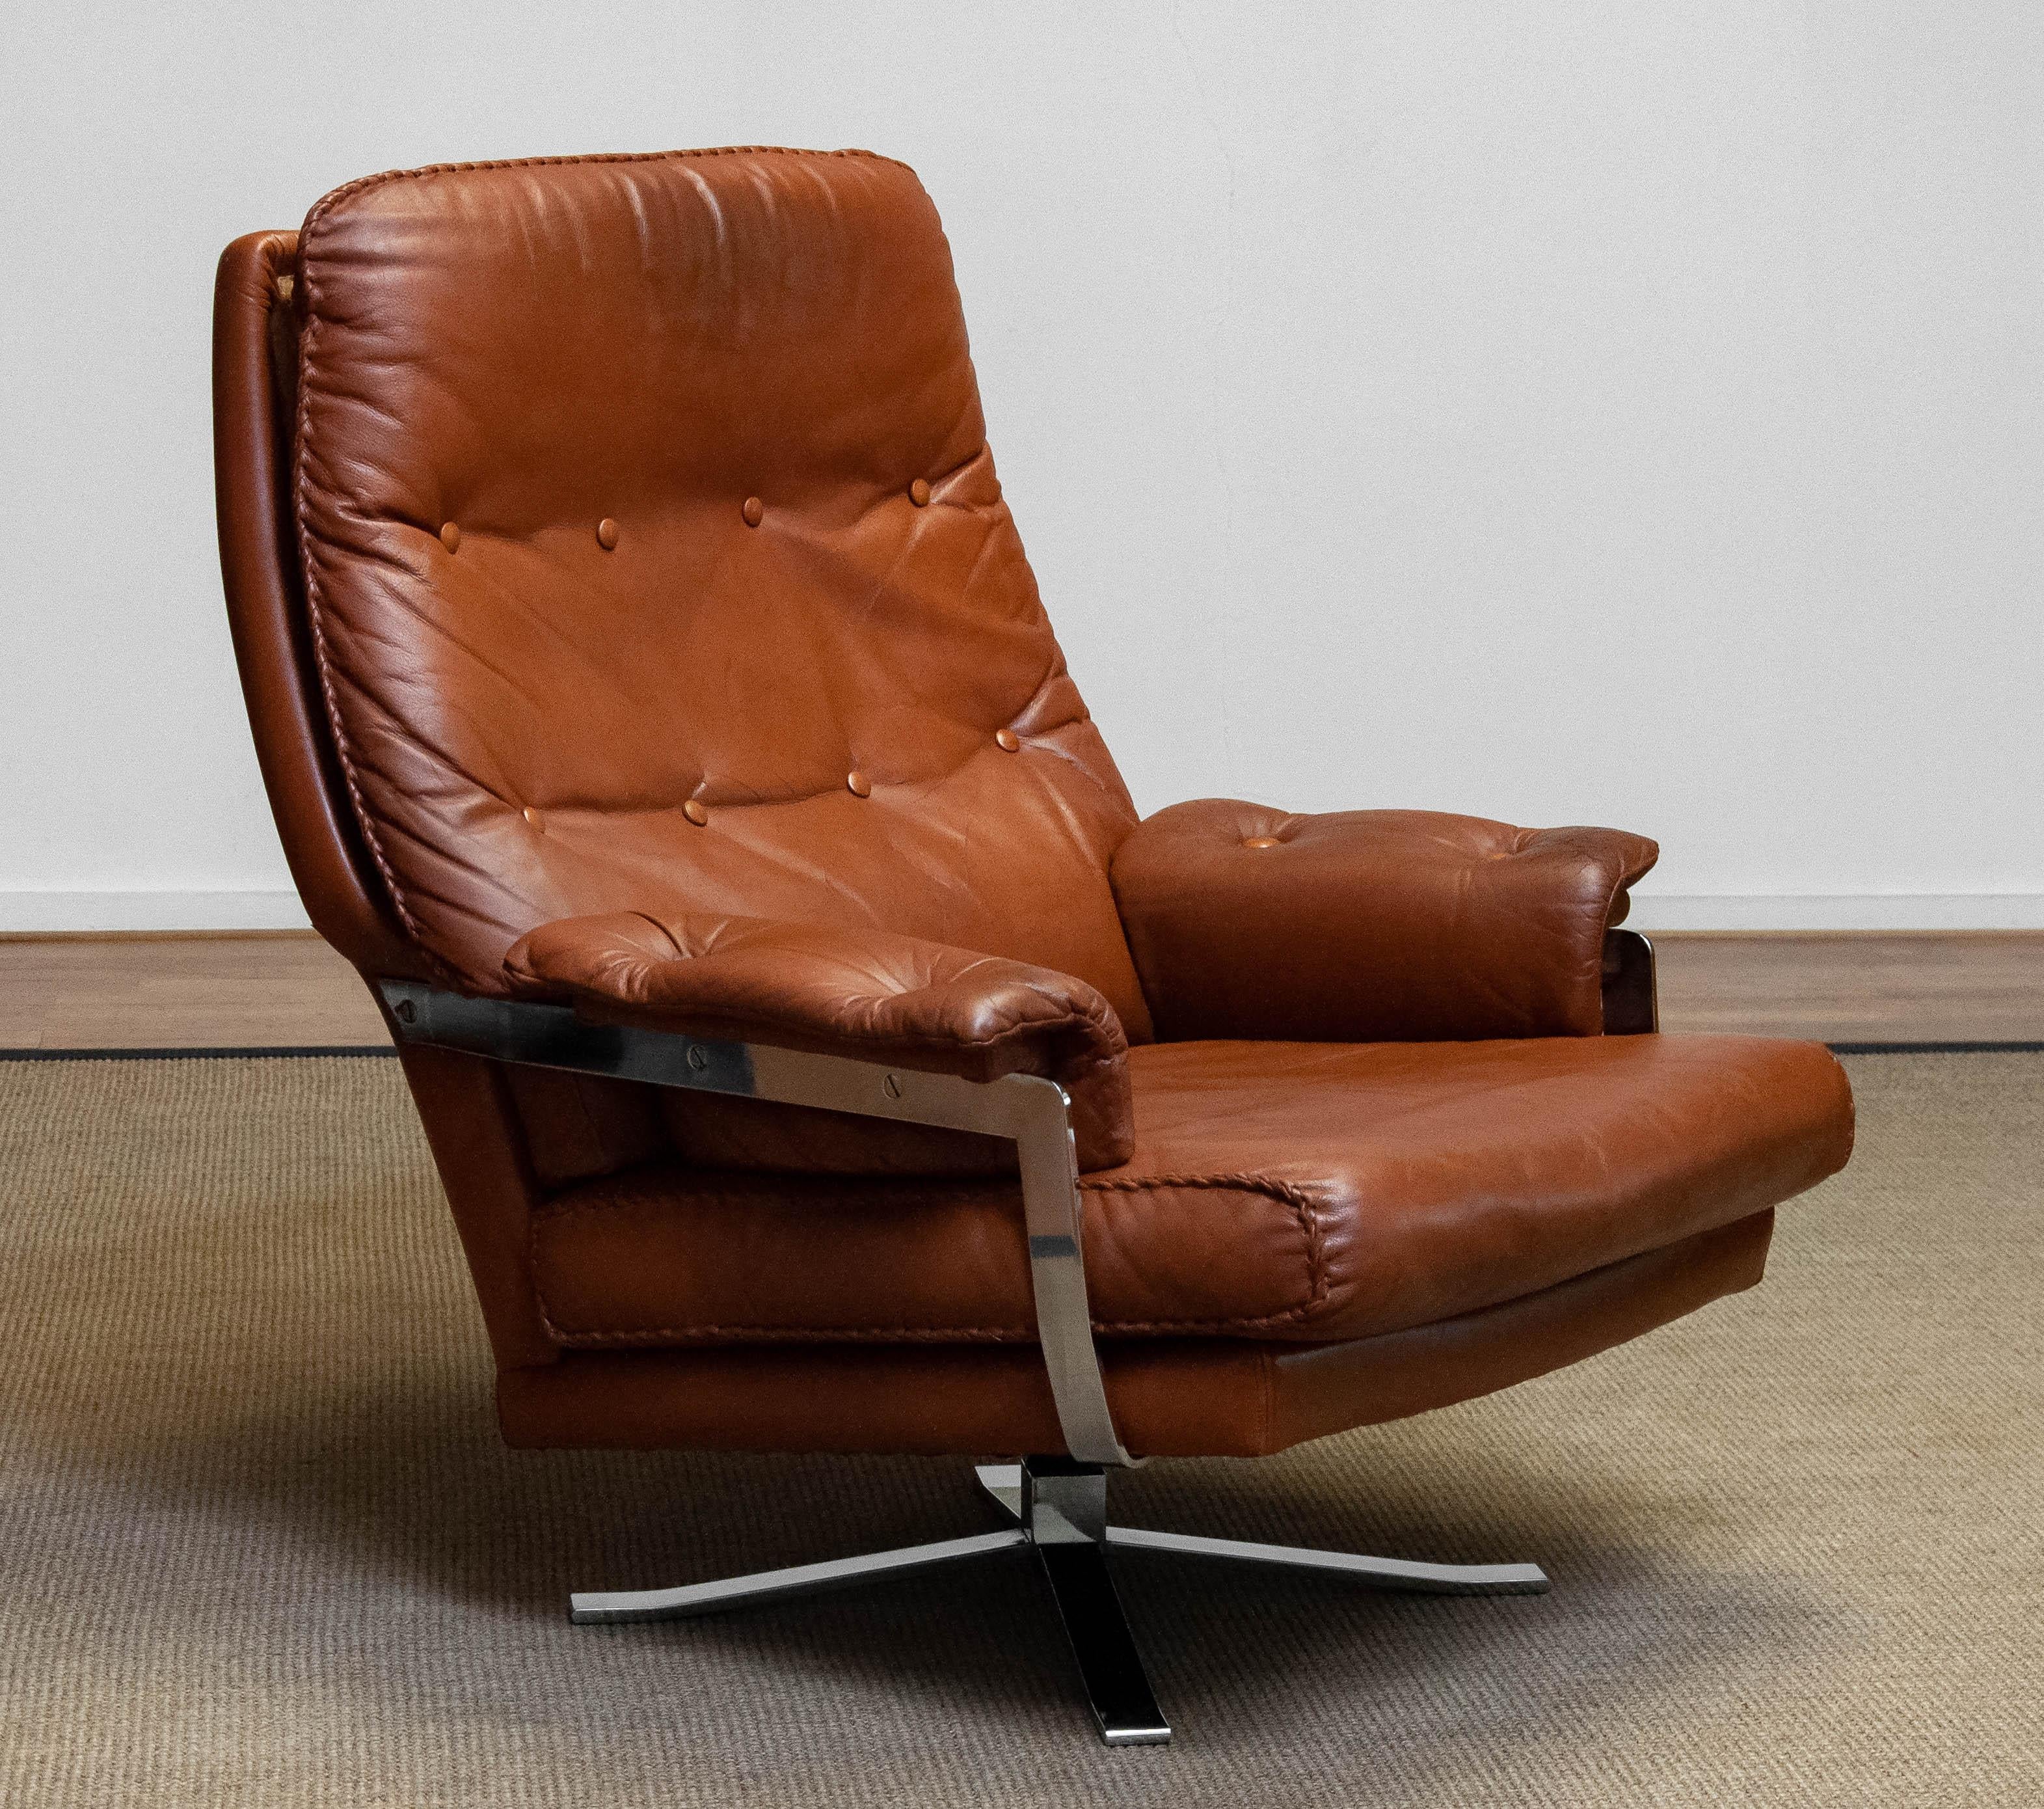 Very comfortable and luxury swivel chair in tan brown hand stitched leather designed by the famous Swedish designer Arne Norell for Vatne Møbler in Norway.
The beautiful tan brown leather is in allover good condition ( one drier spot in the lower